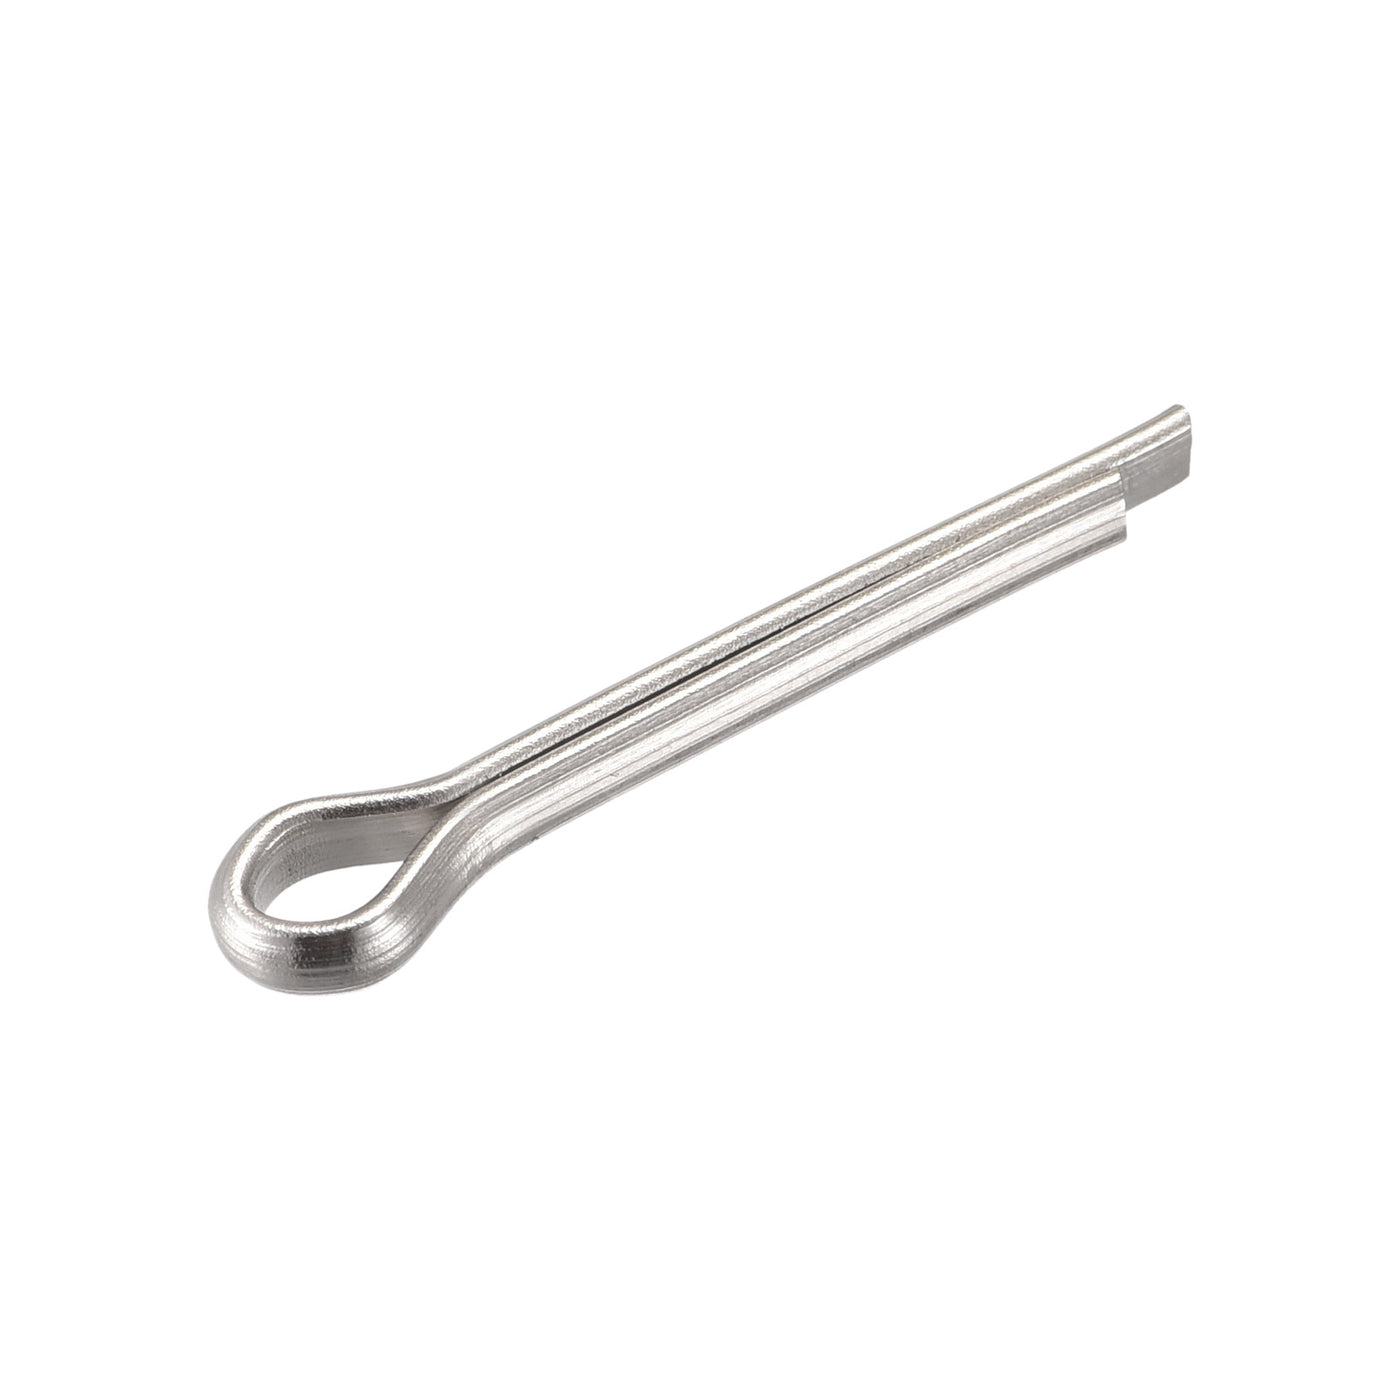 uxcell Uxcell Split Cotter Pin, 4mm x 25mm Stainless Steel Clip Fastener Fitting for Automotive, Mechanics, Silver Tone, 15Pcs